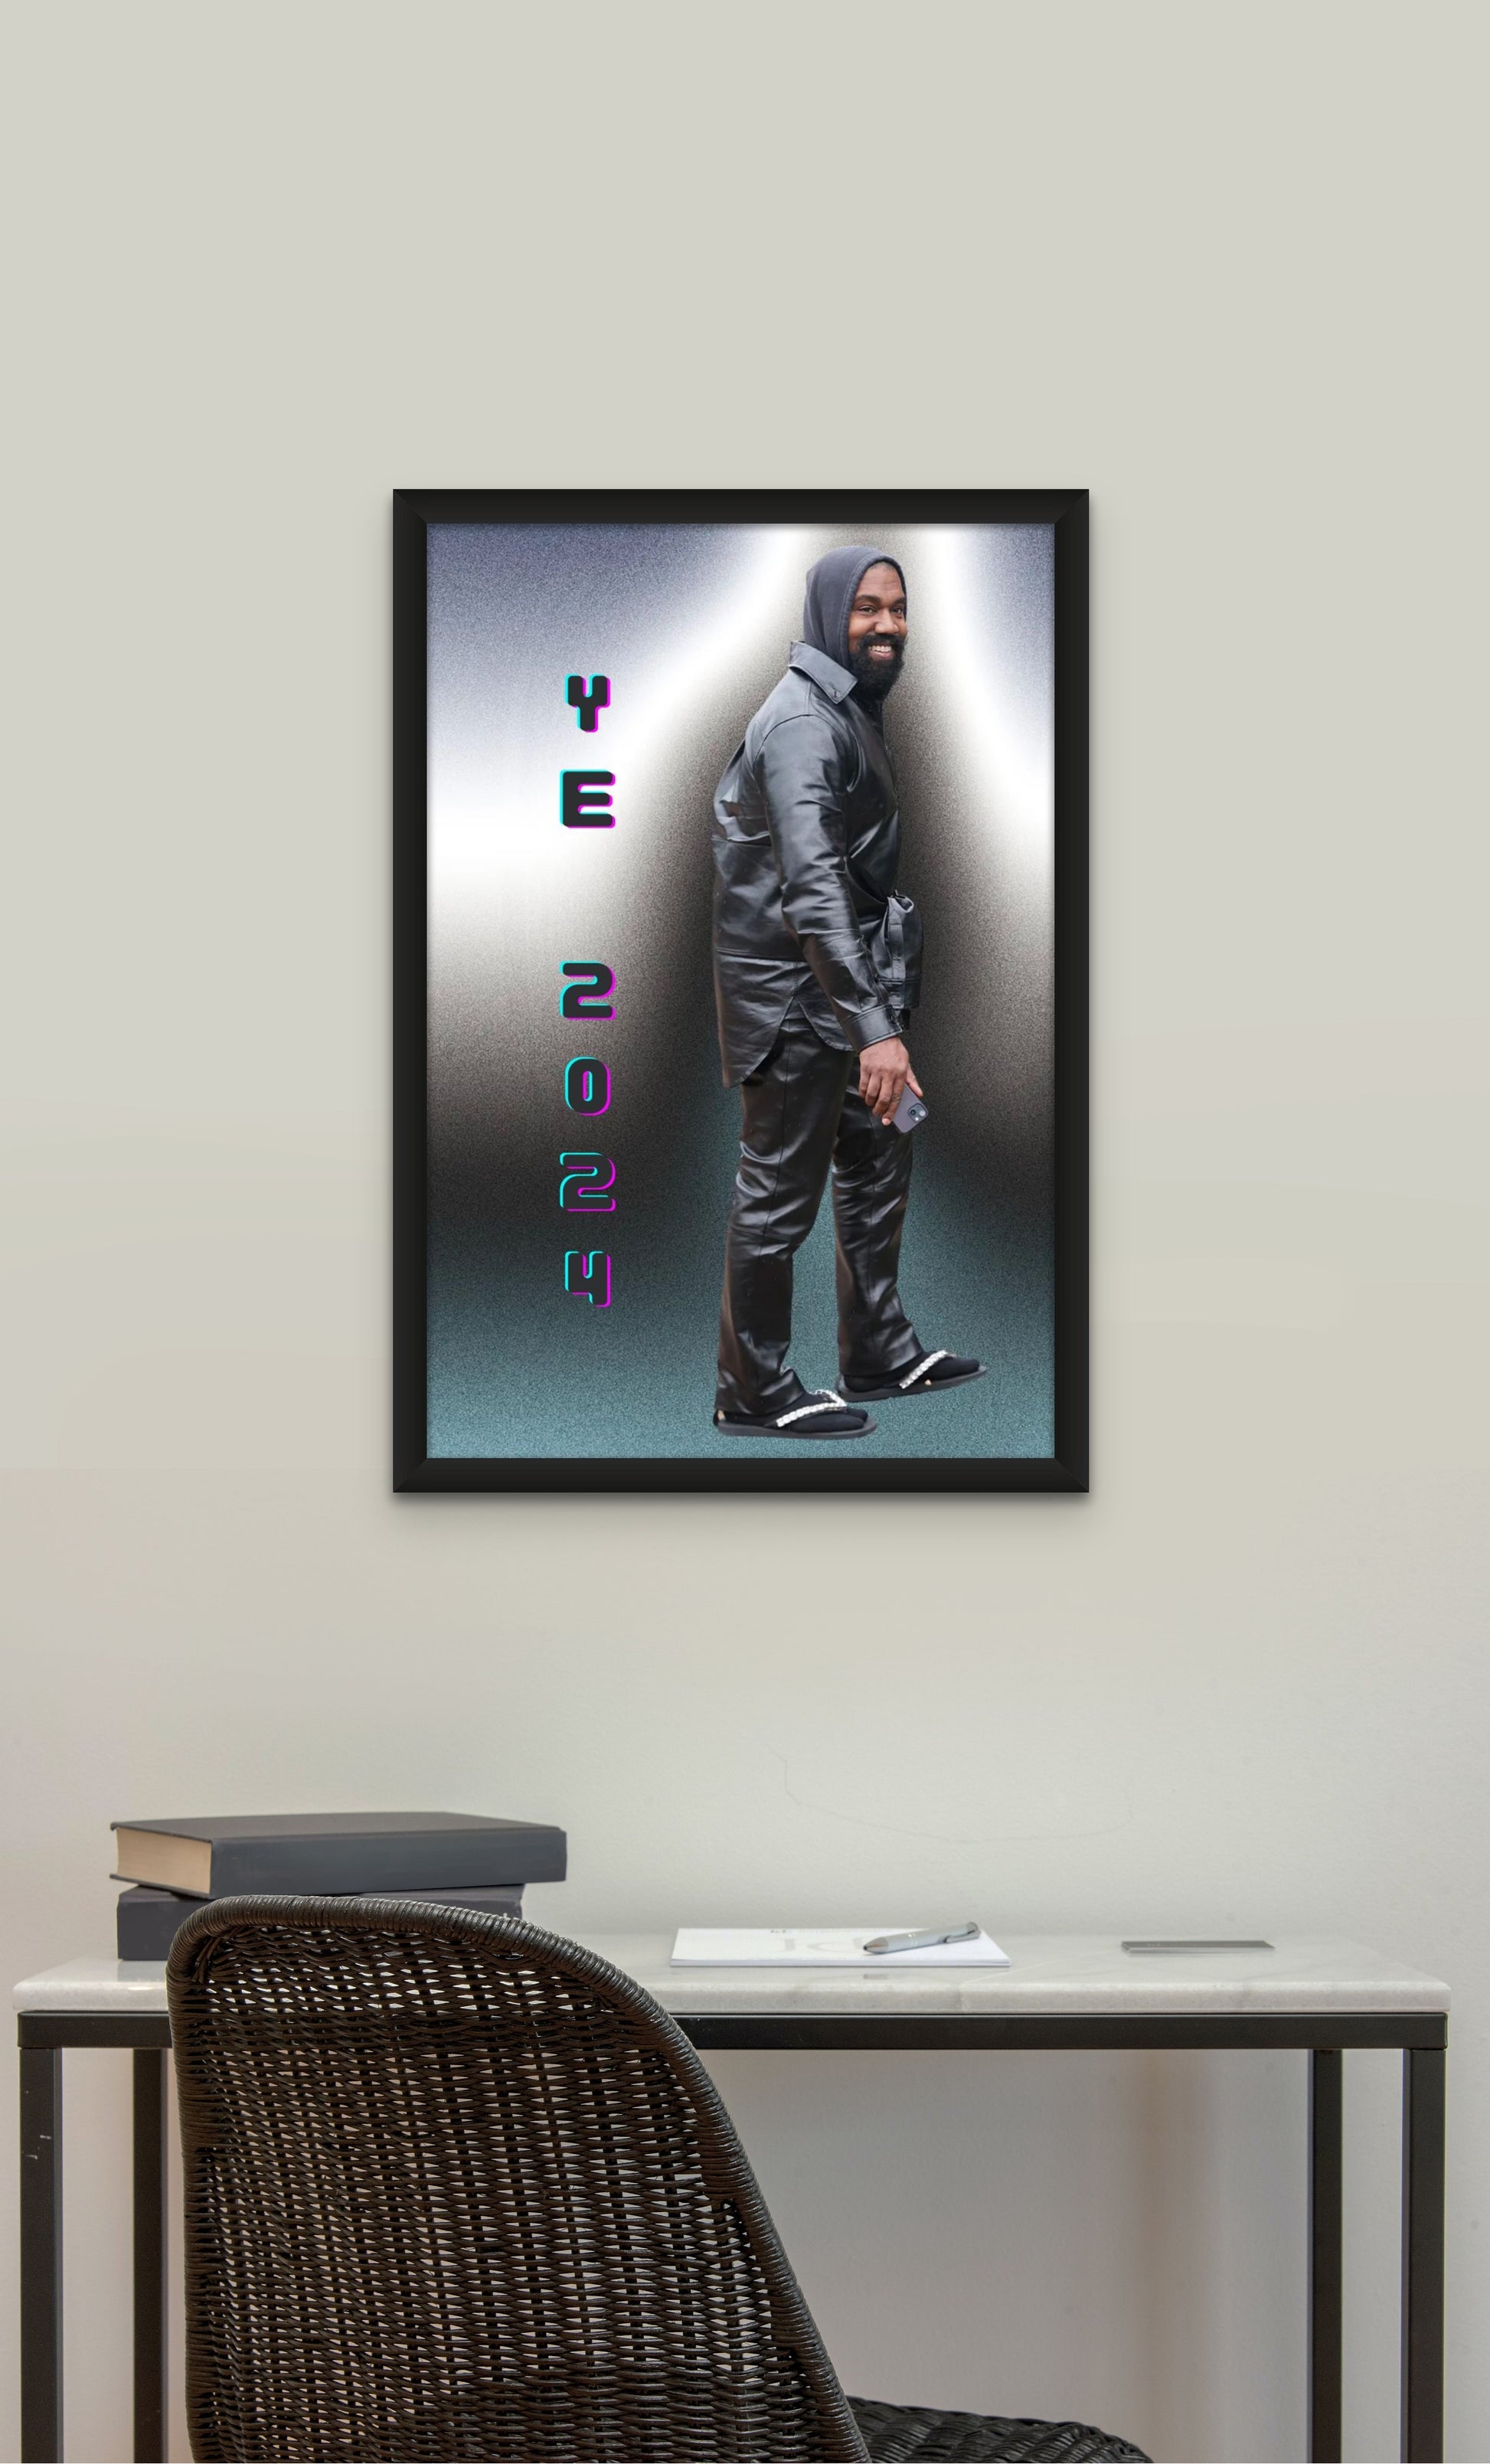 Kanye West Pop Art Poster Nothing in life is promised